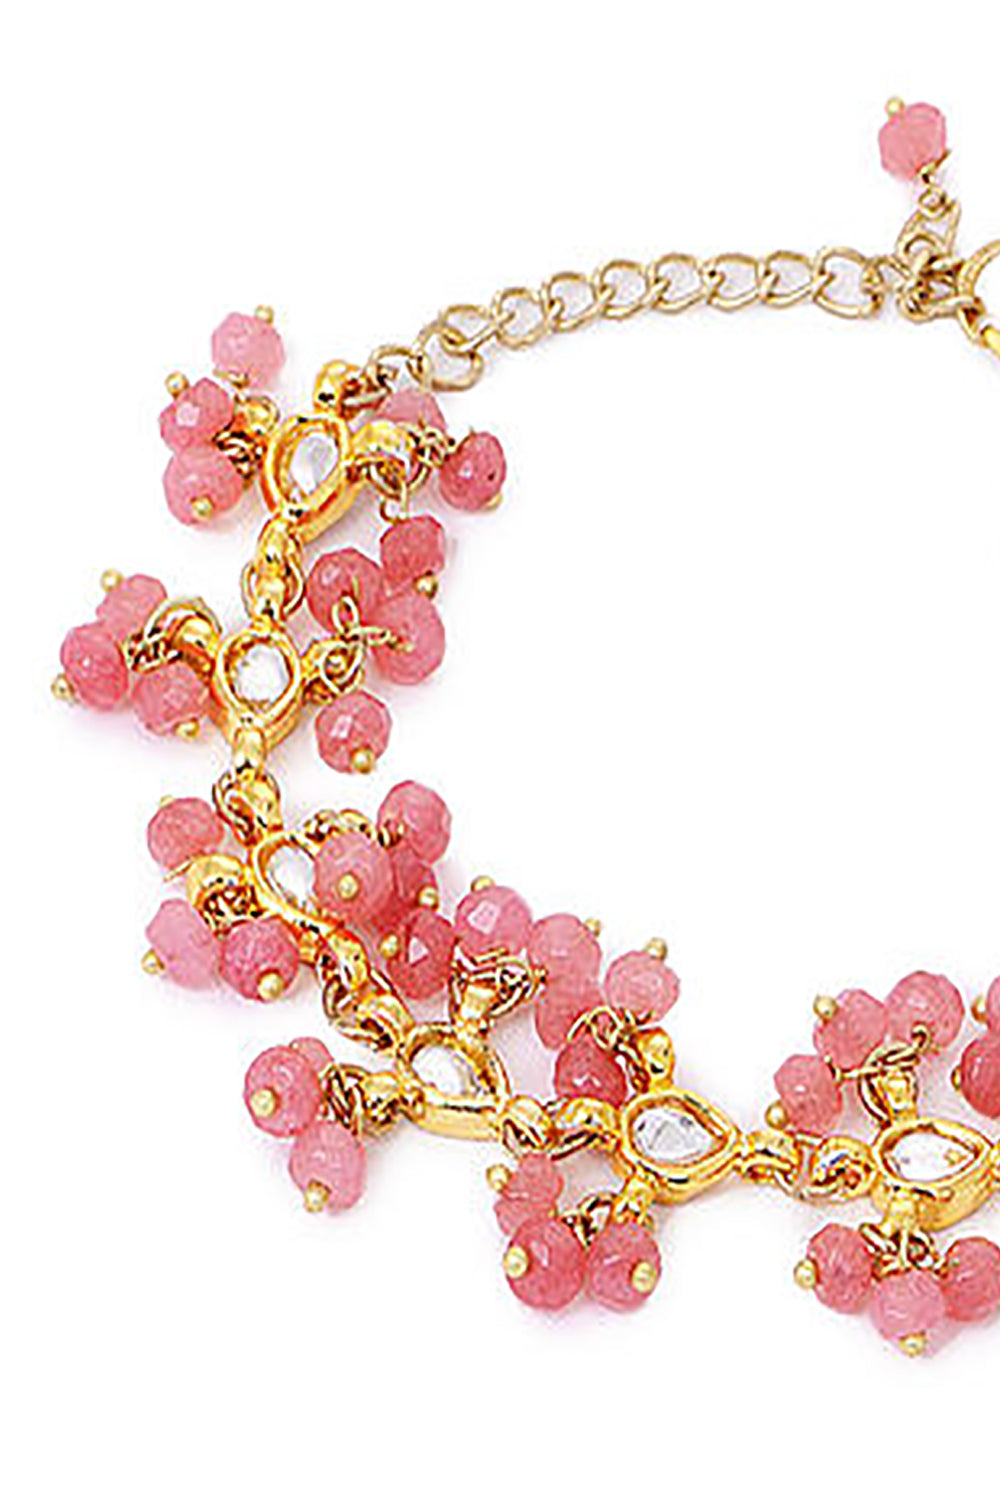 Alloy Kundan Bracelet in Pink and Gold